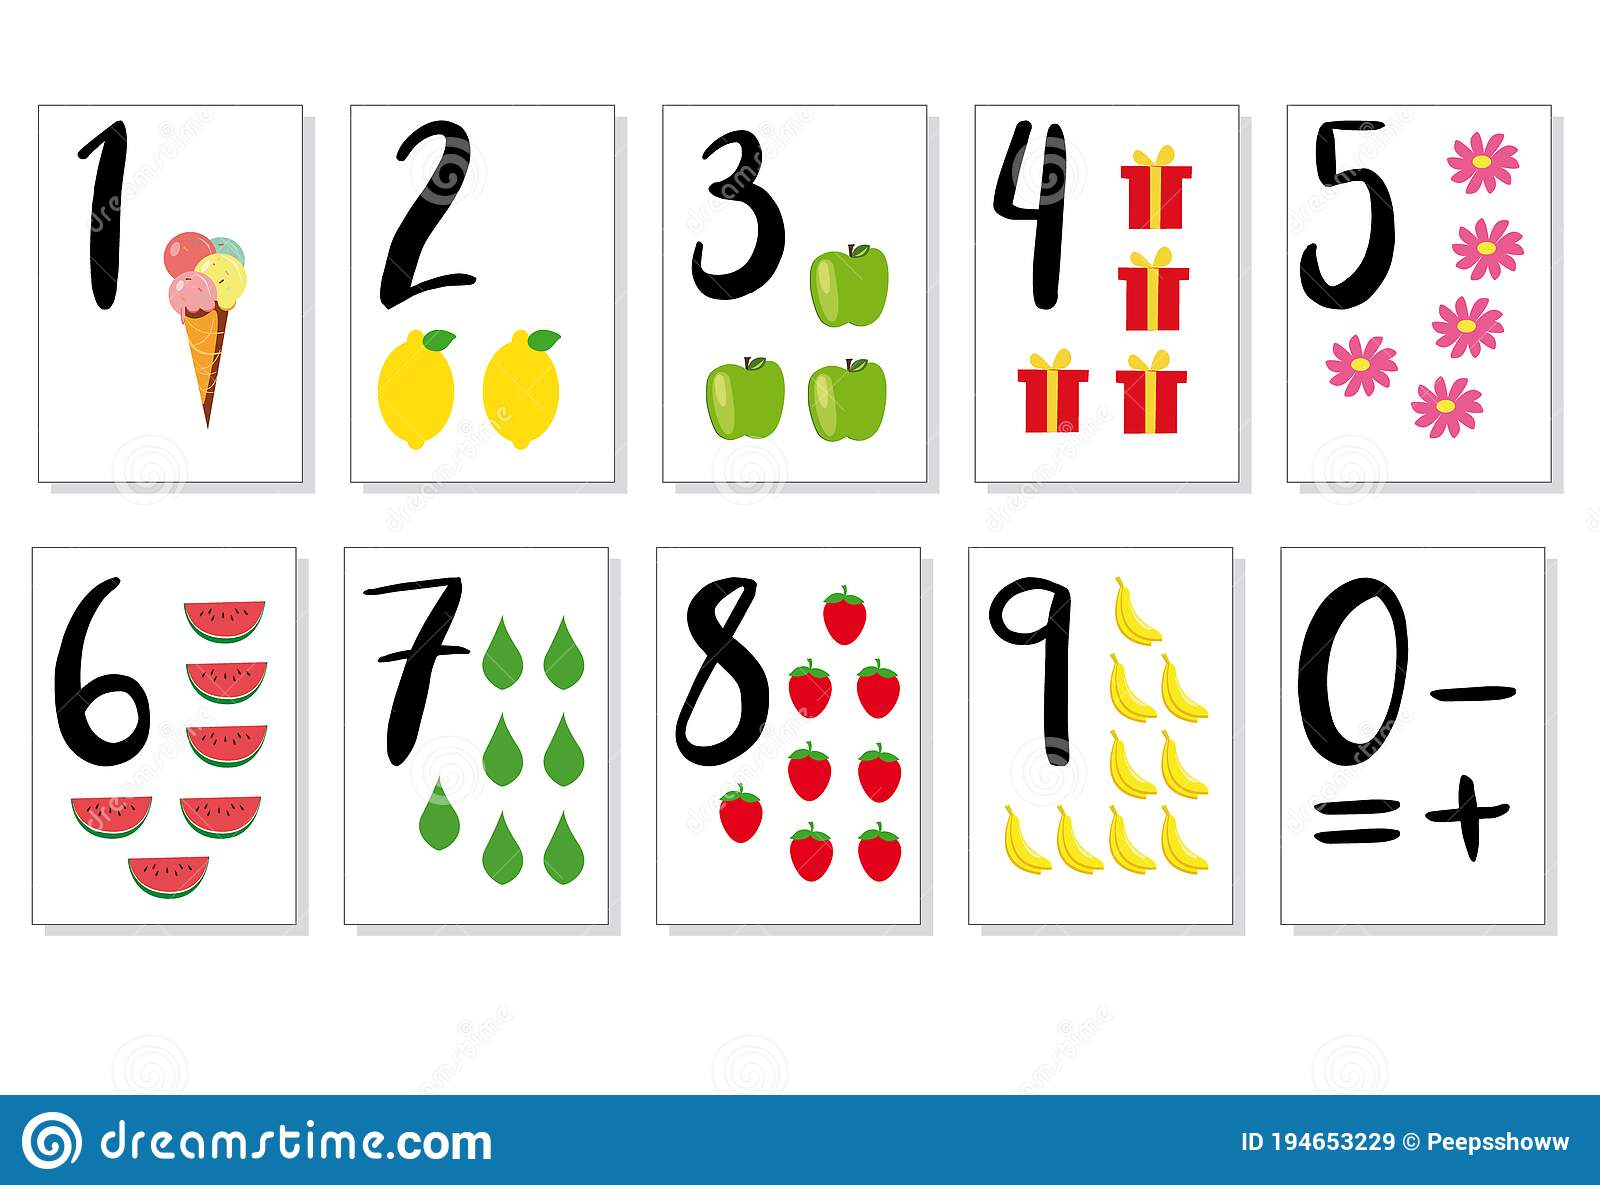 Printable Flashcard Collection For Numbers From 0 To 10 